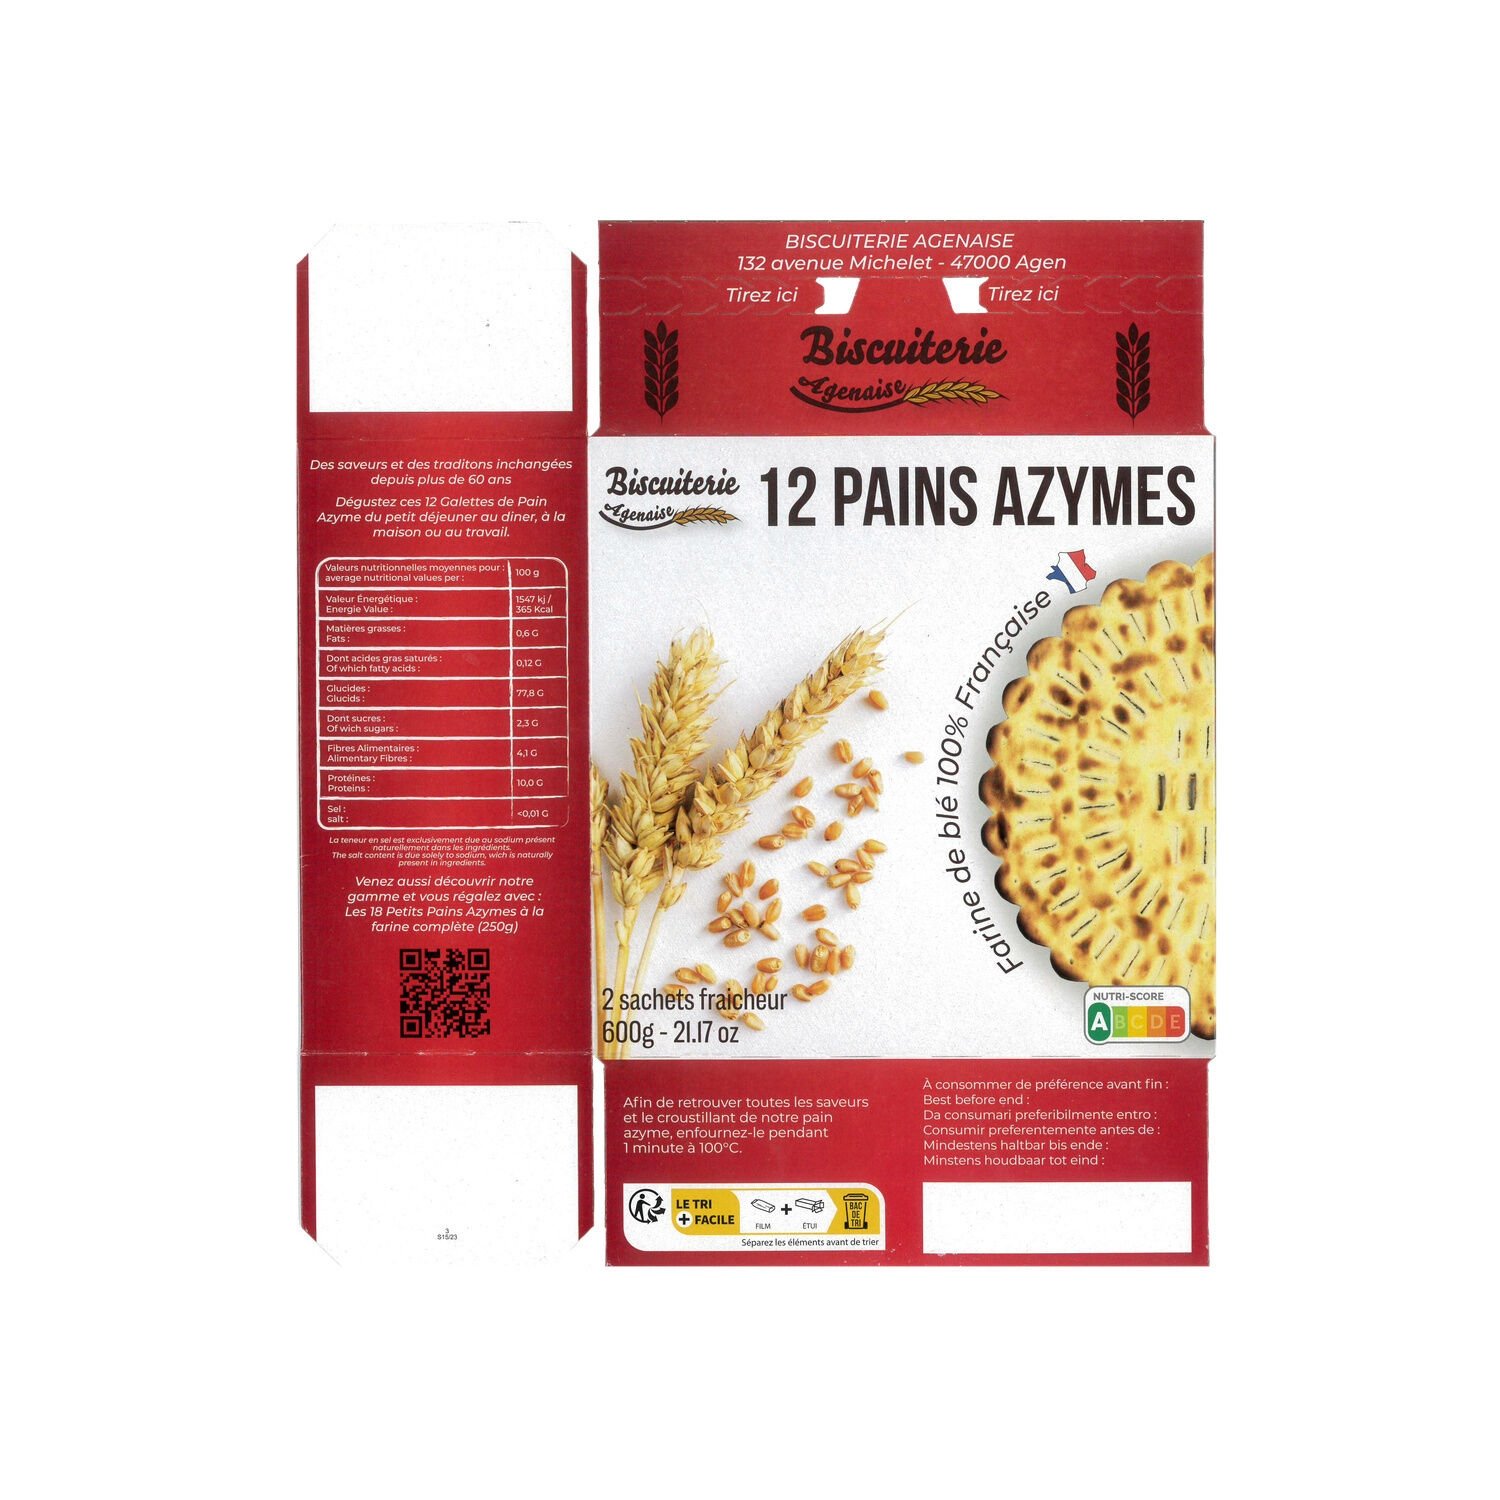 Petits Pains Azymes - Biscuiterie Agenaise